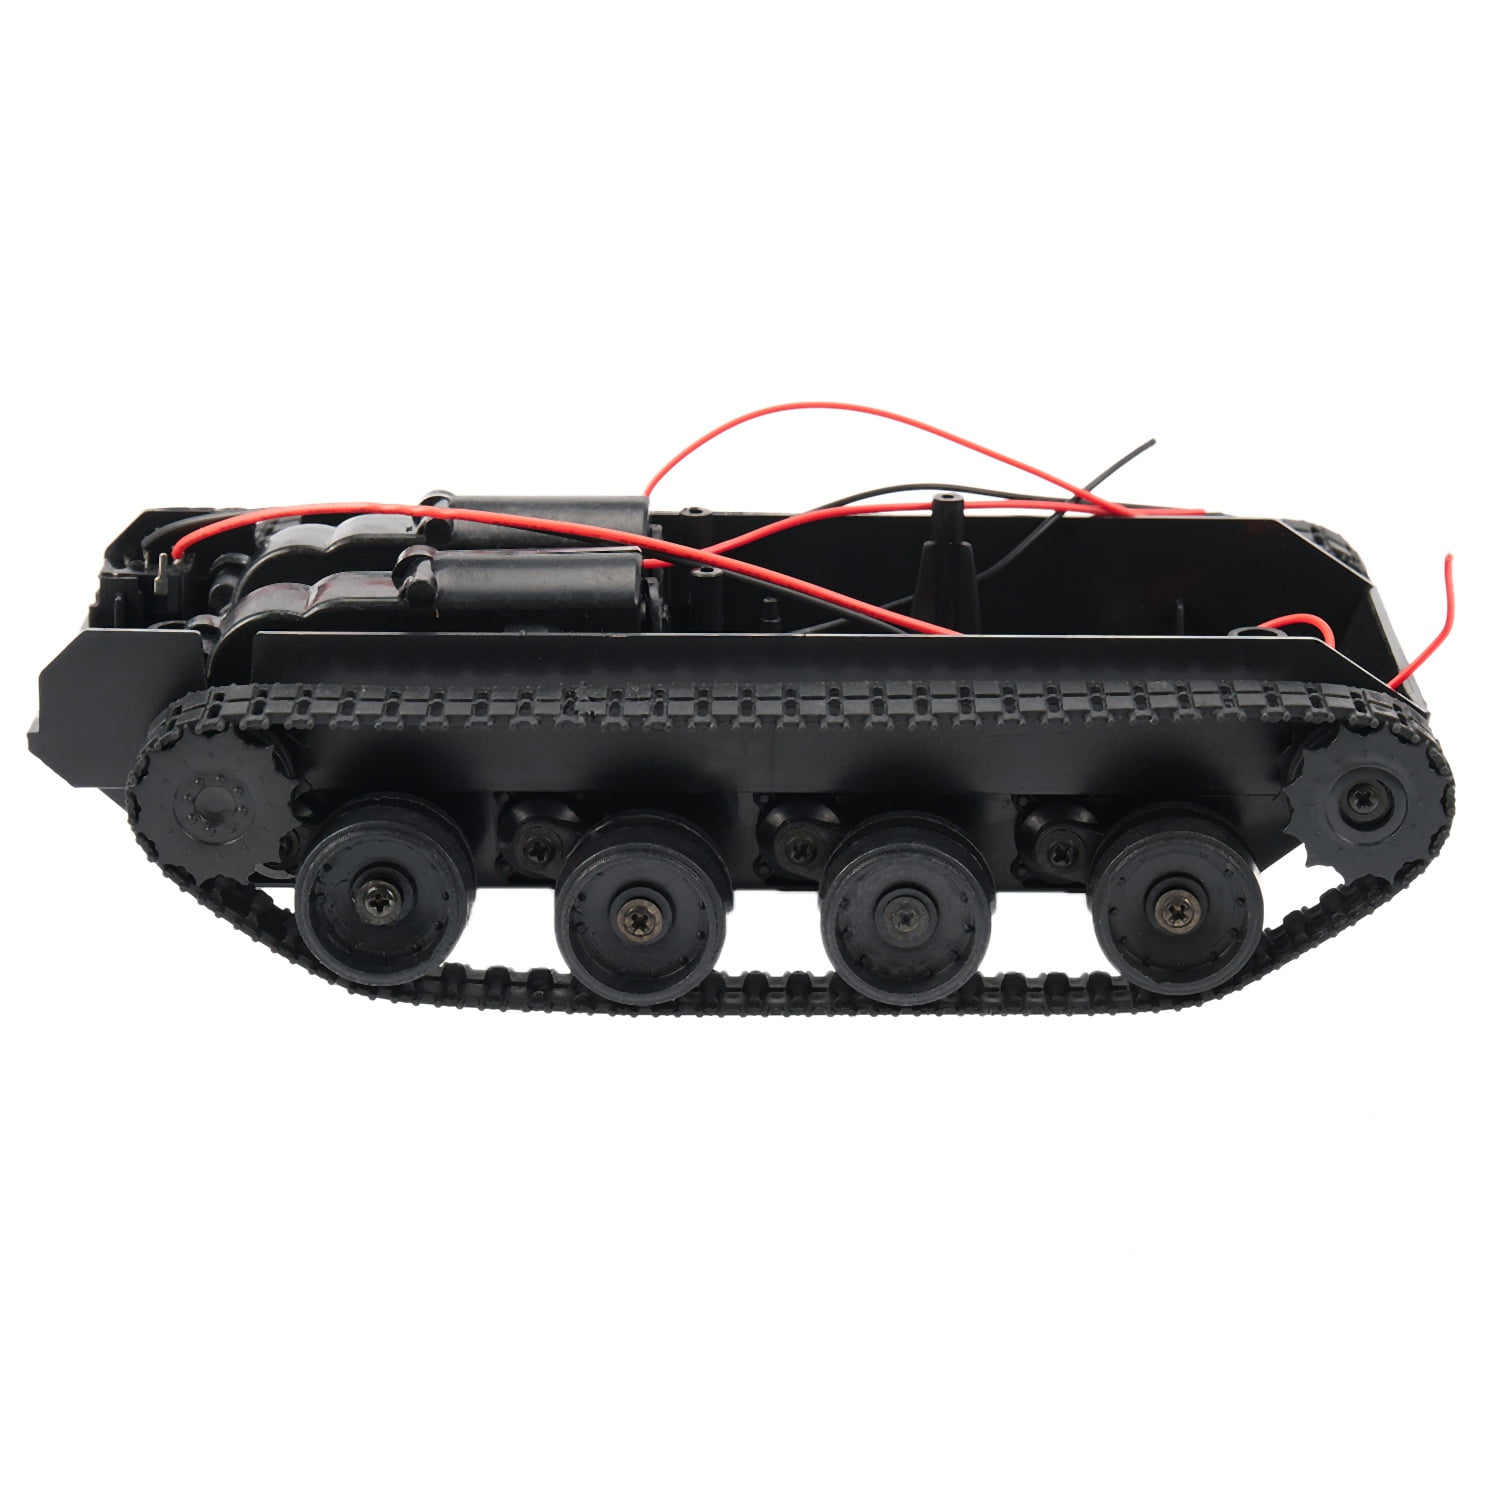 Details about   Smart Robot Tank Car Chassis Kit Rubber Track Crawler For Arduino 130 Motor❤ 